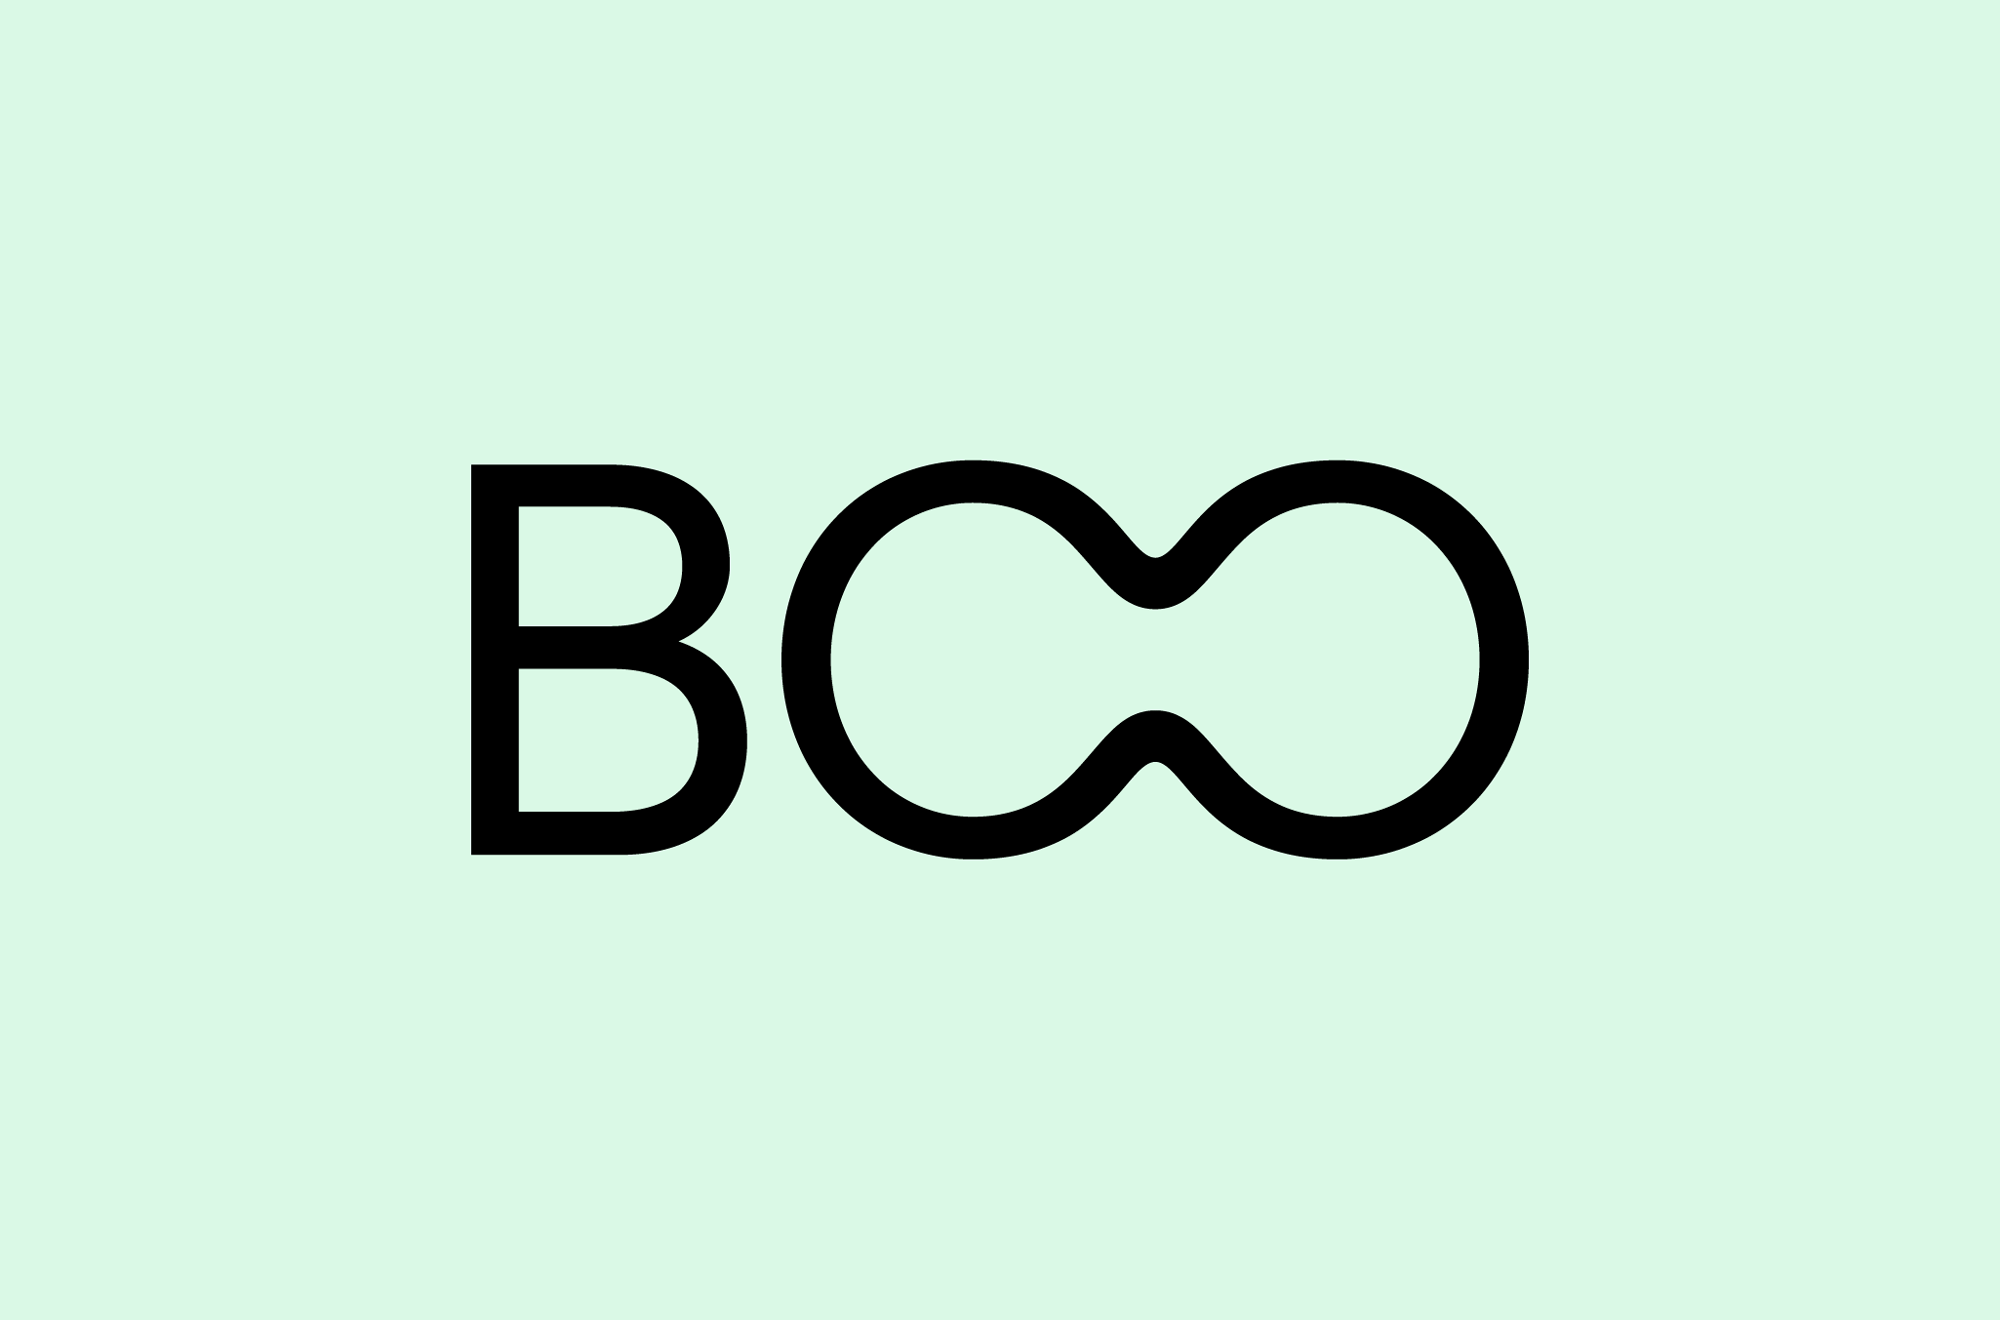 New Logo and Identity for BOO by Rice